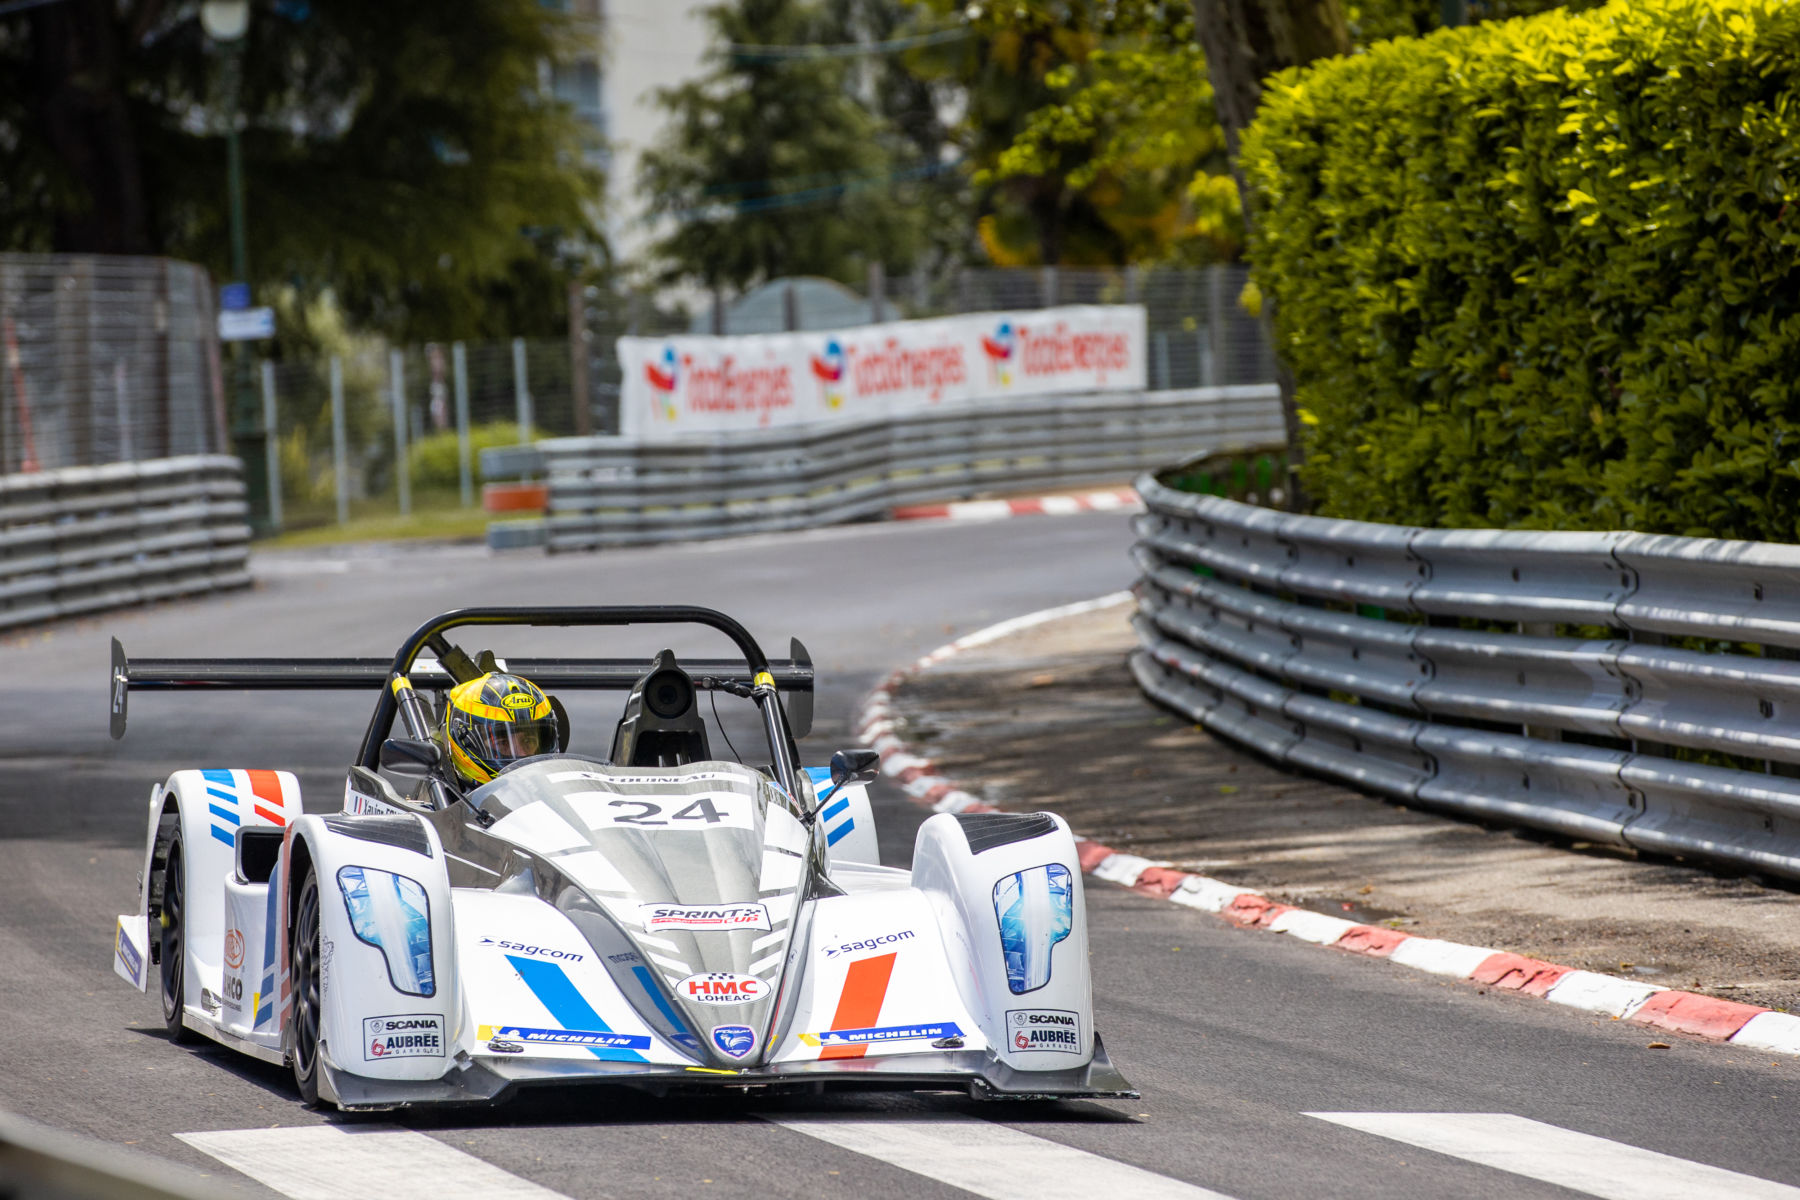 Sprint CUP by Funyo in the Grand Prix of Pau